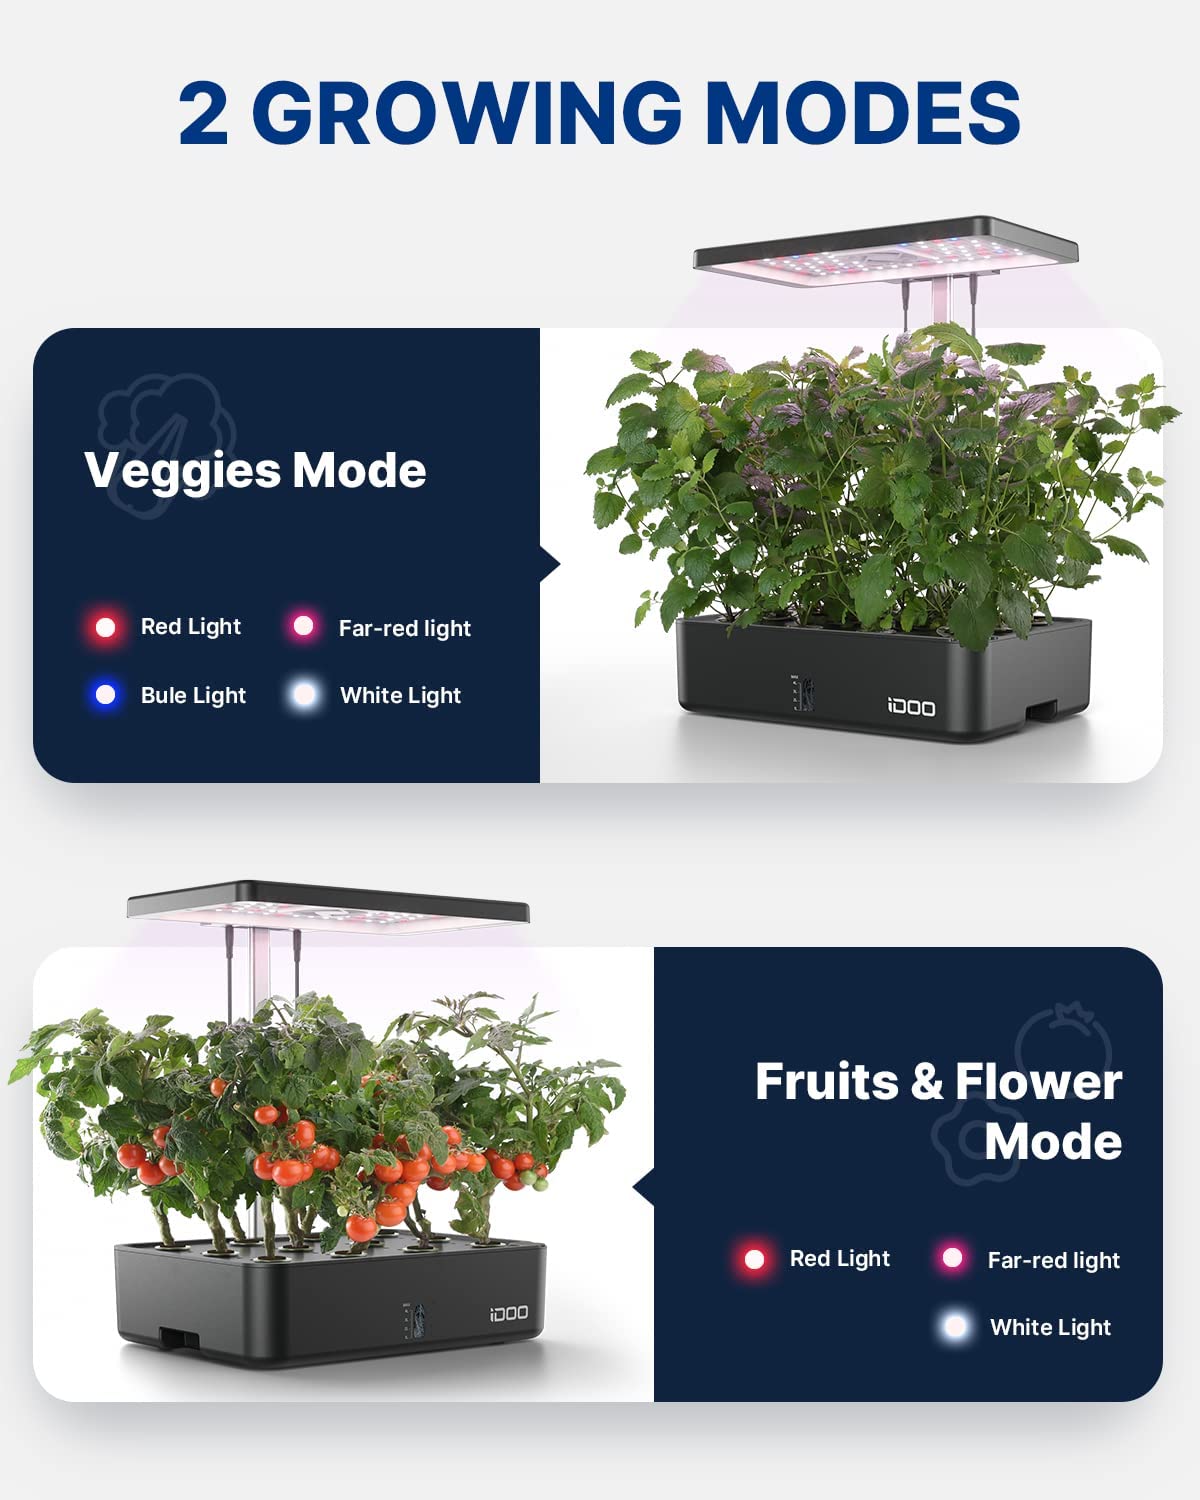 iDOO WiFi 12 Pods Indoor Garden with APP Controlled - 12 Pods _wf_cus Best Seller BFD AU Hydroponic Growing System Wifi by idoo